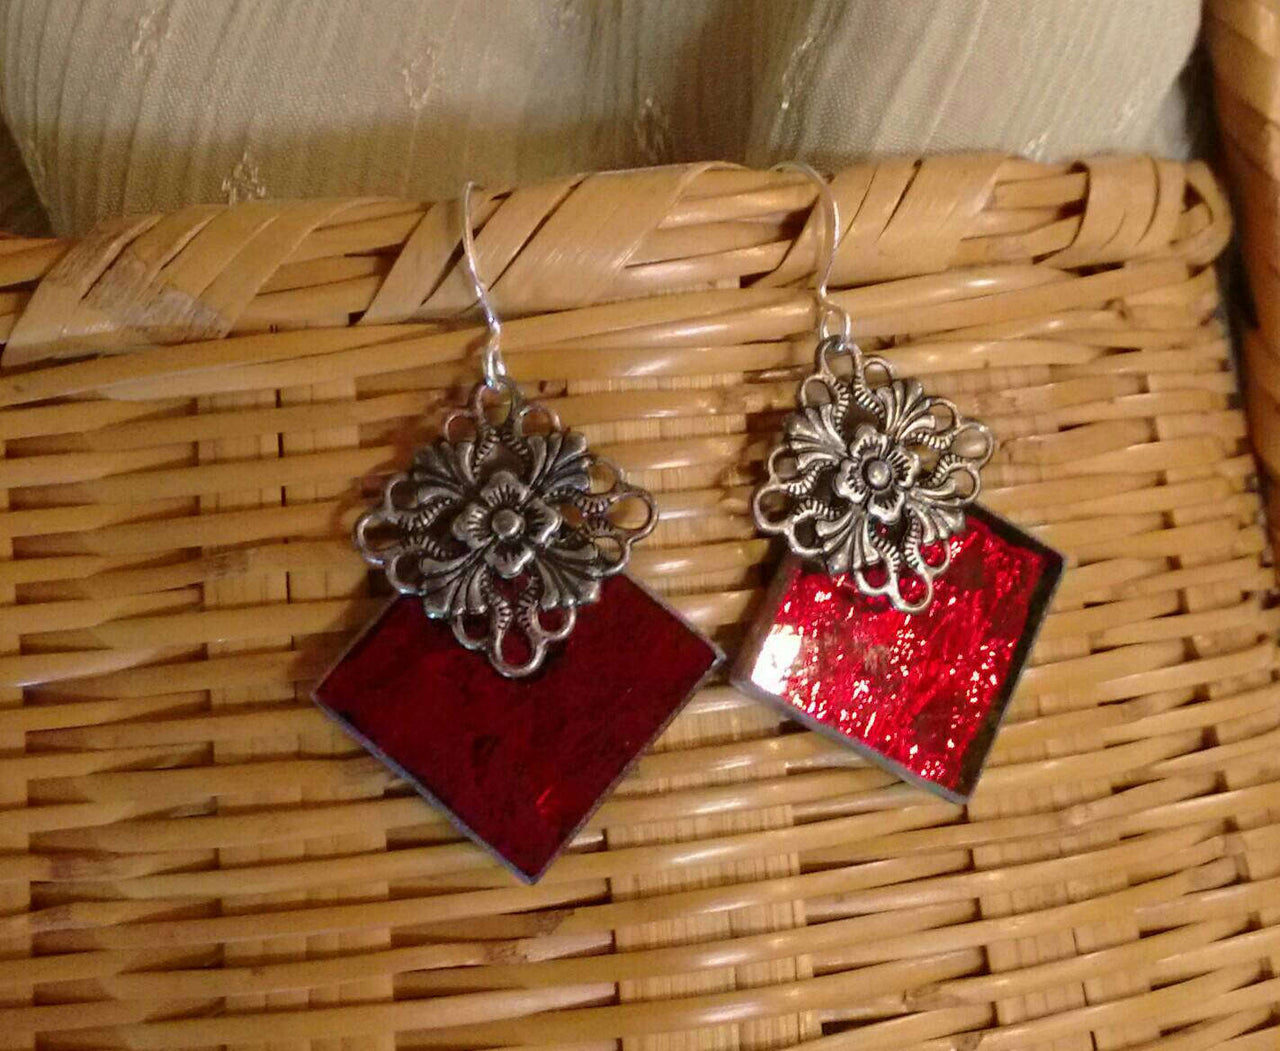 Handcrafted red ripple mirror glass stained glass earrings